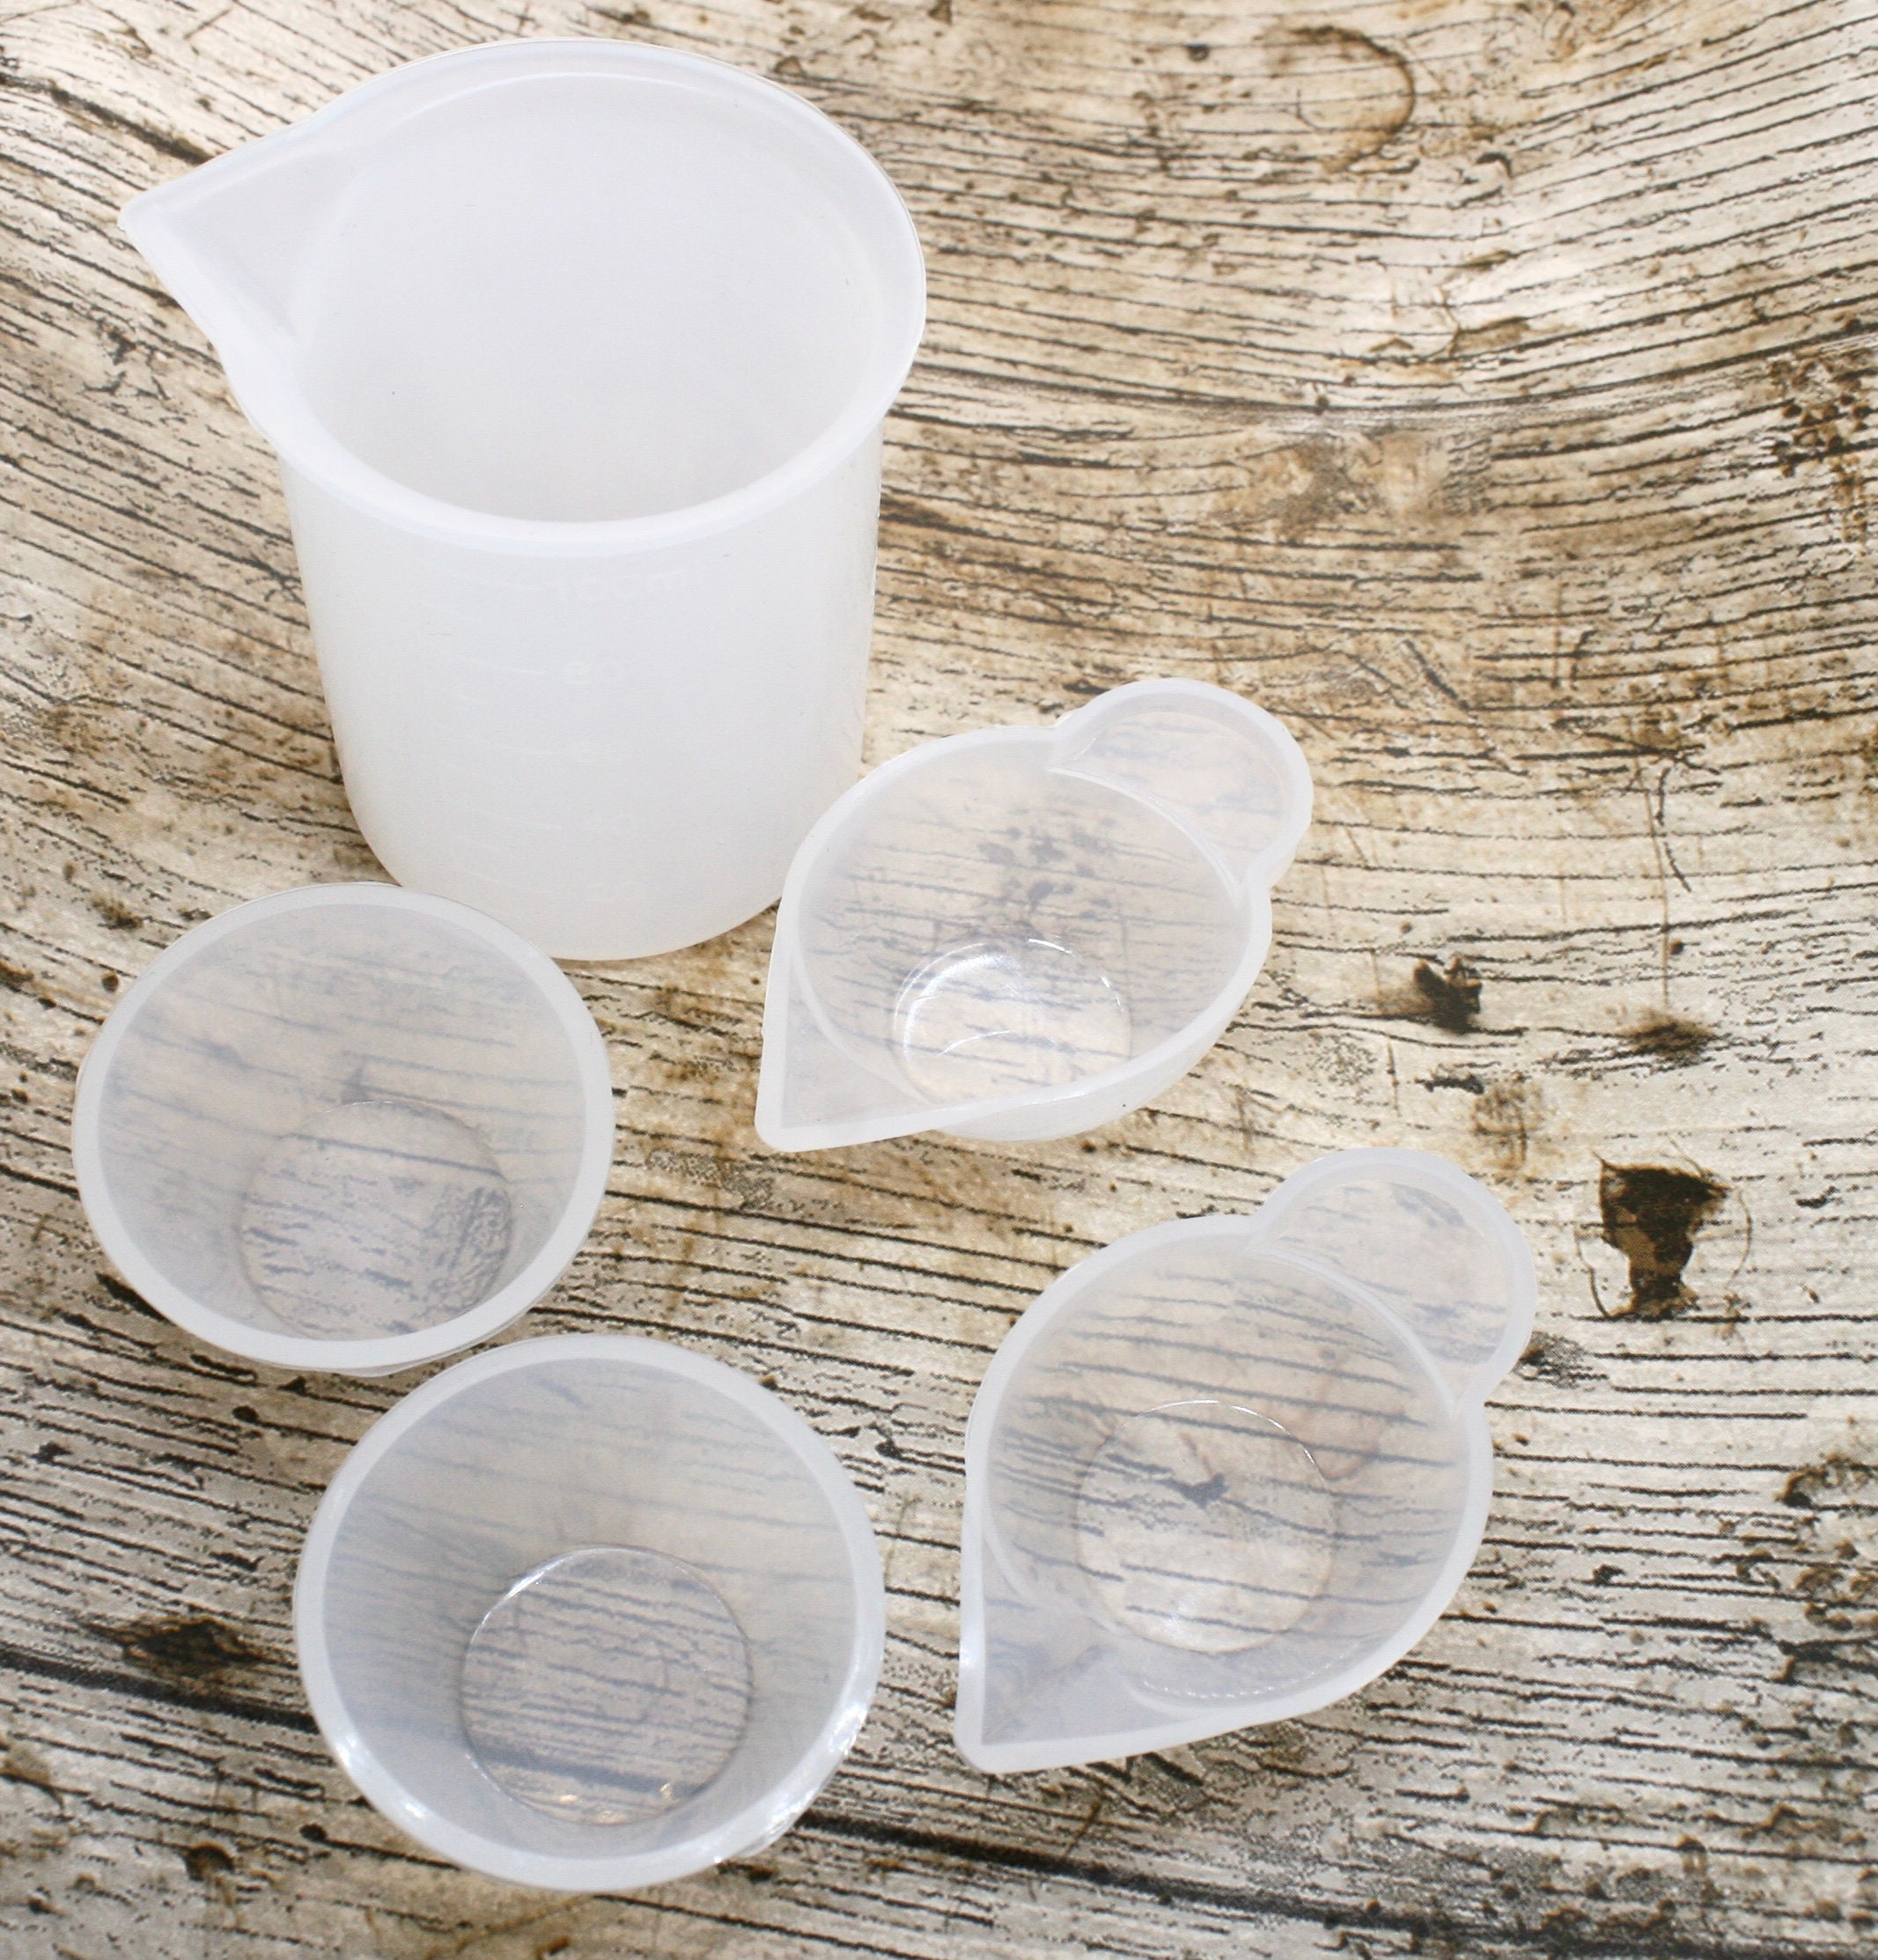  Disposable Epoxy Resin Mixing Cups with Measurements (50-Pack)  Pixiss Mixing Cups for Epoxy Resin, Epoxy Mixing Containers, Epoxy Cups For Epoxy  Measuring Cups - 20 Resin Mixing Sticks : Arts, Crafts